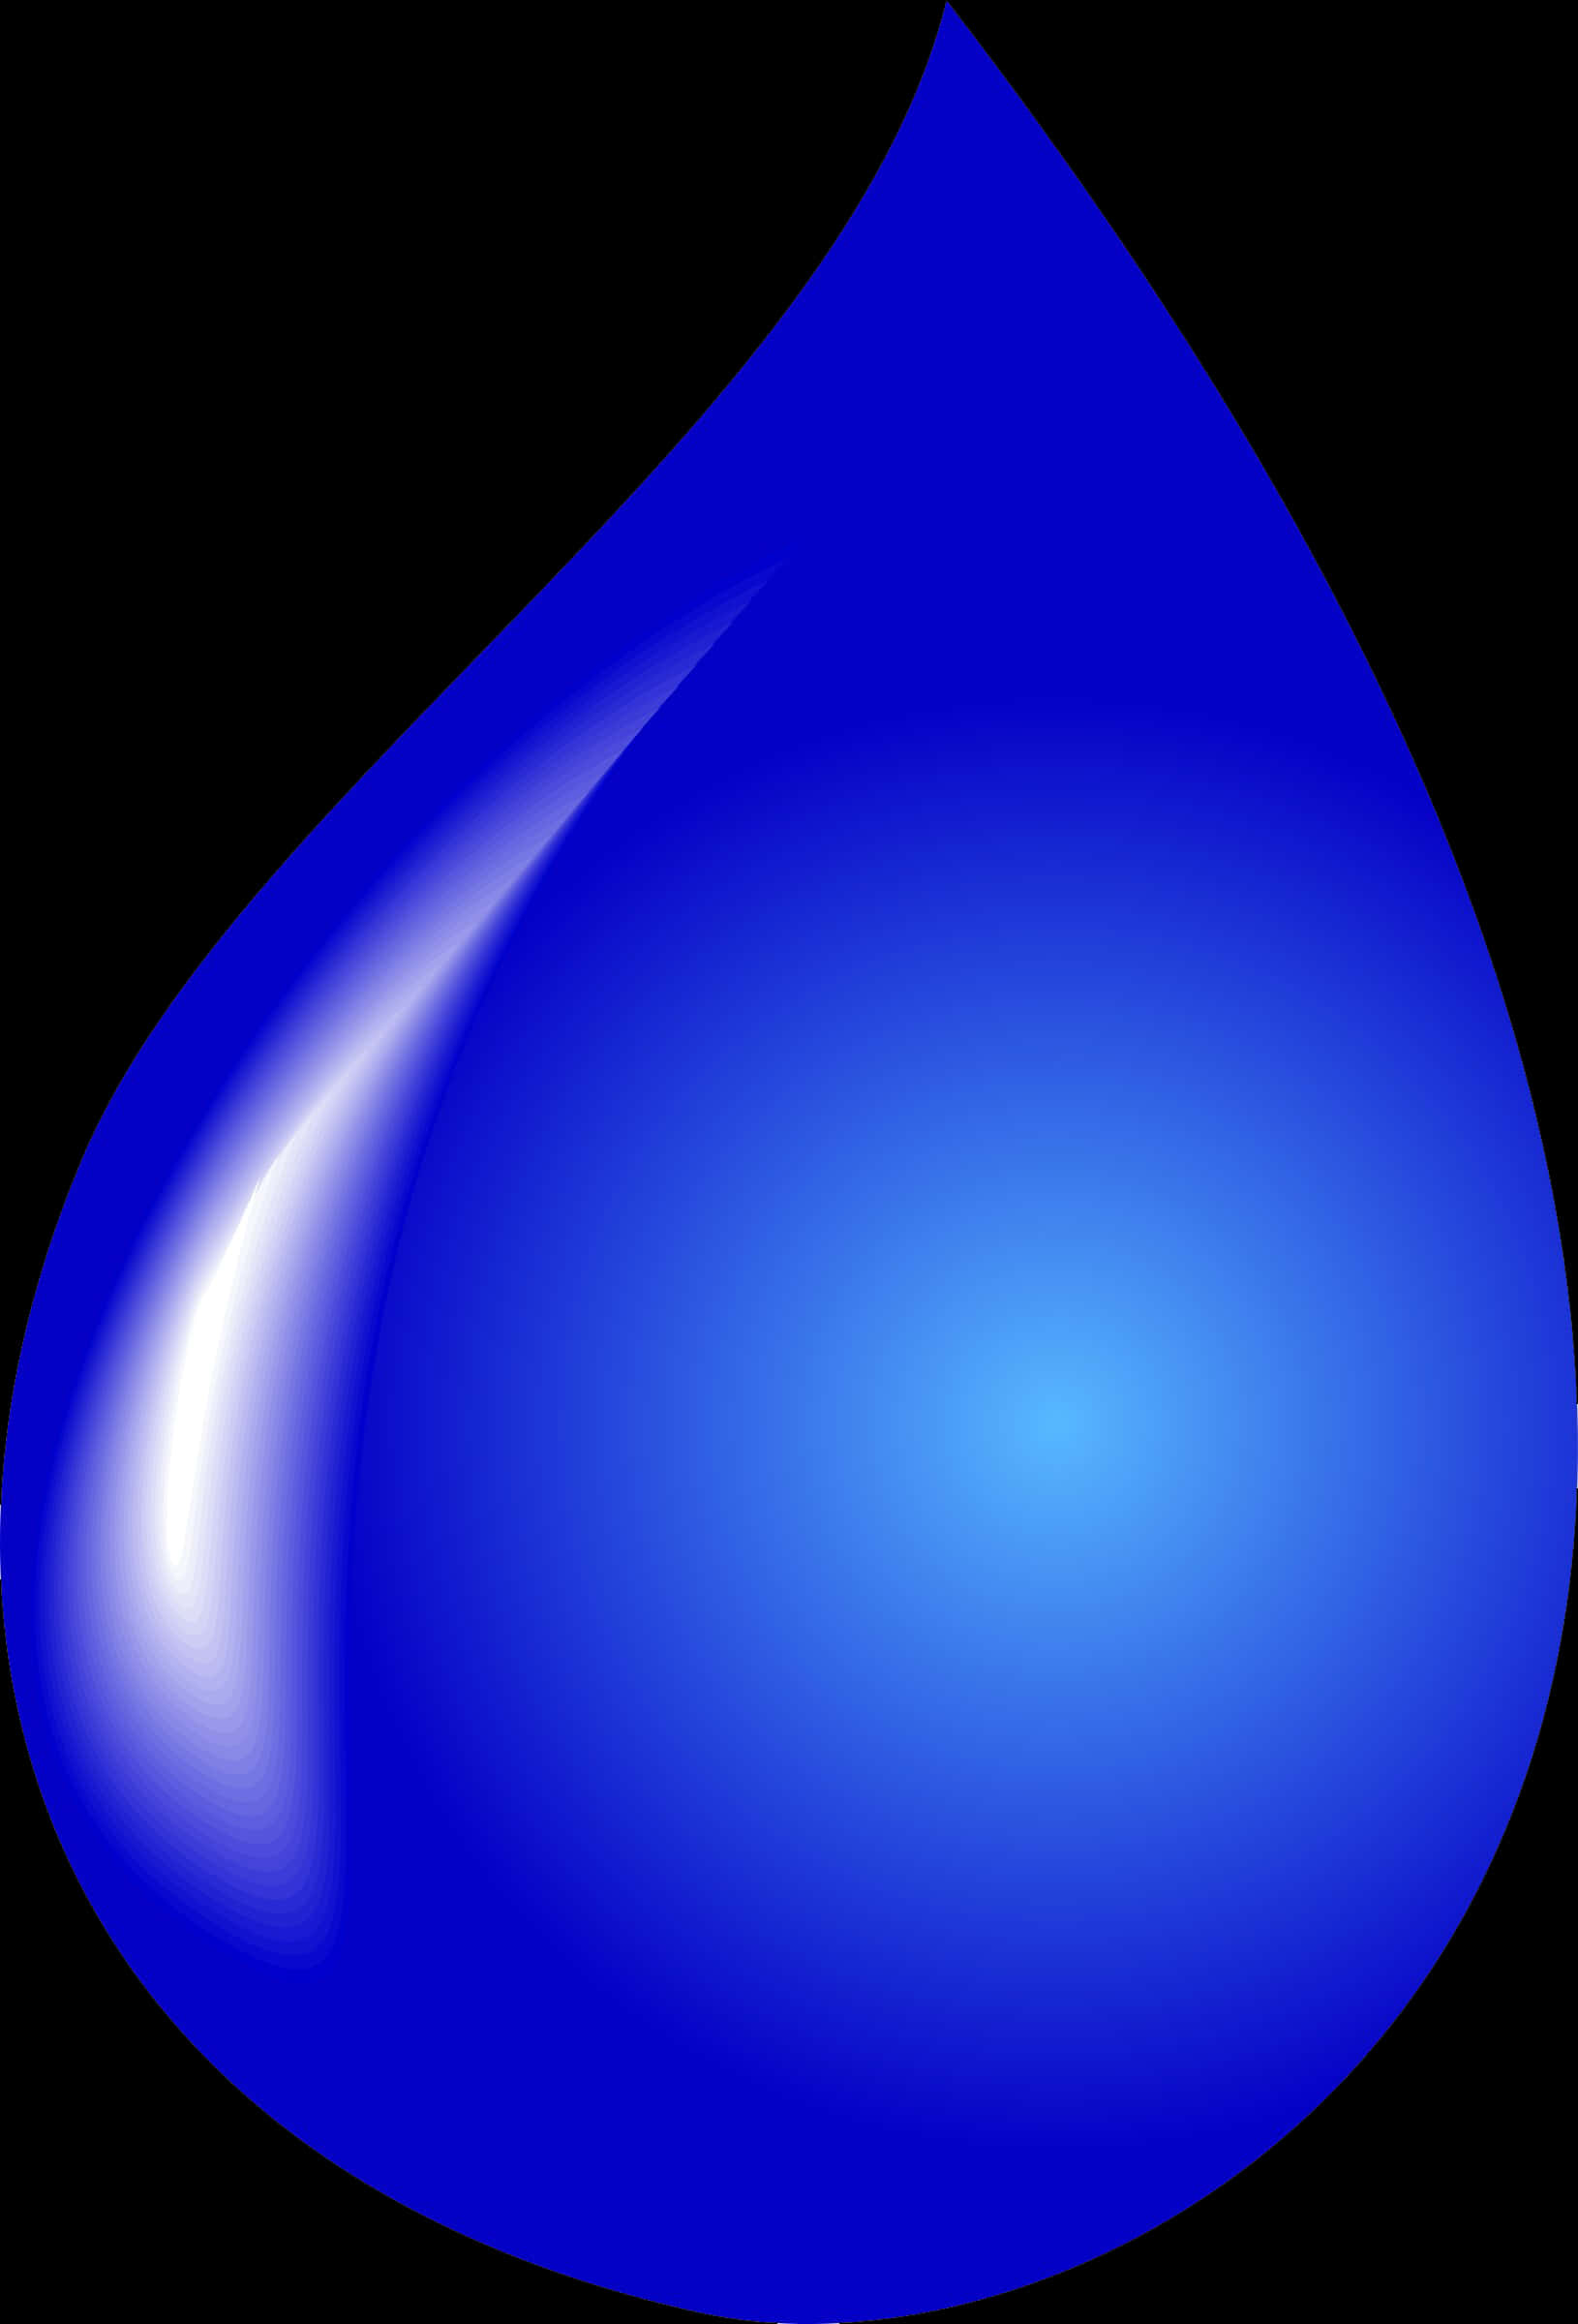 Blue Water Drop Graphic PNG